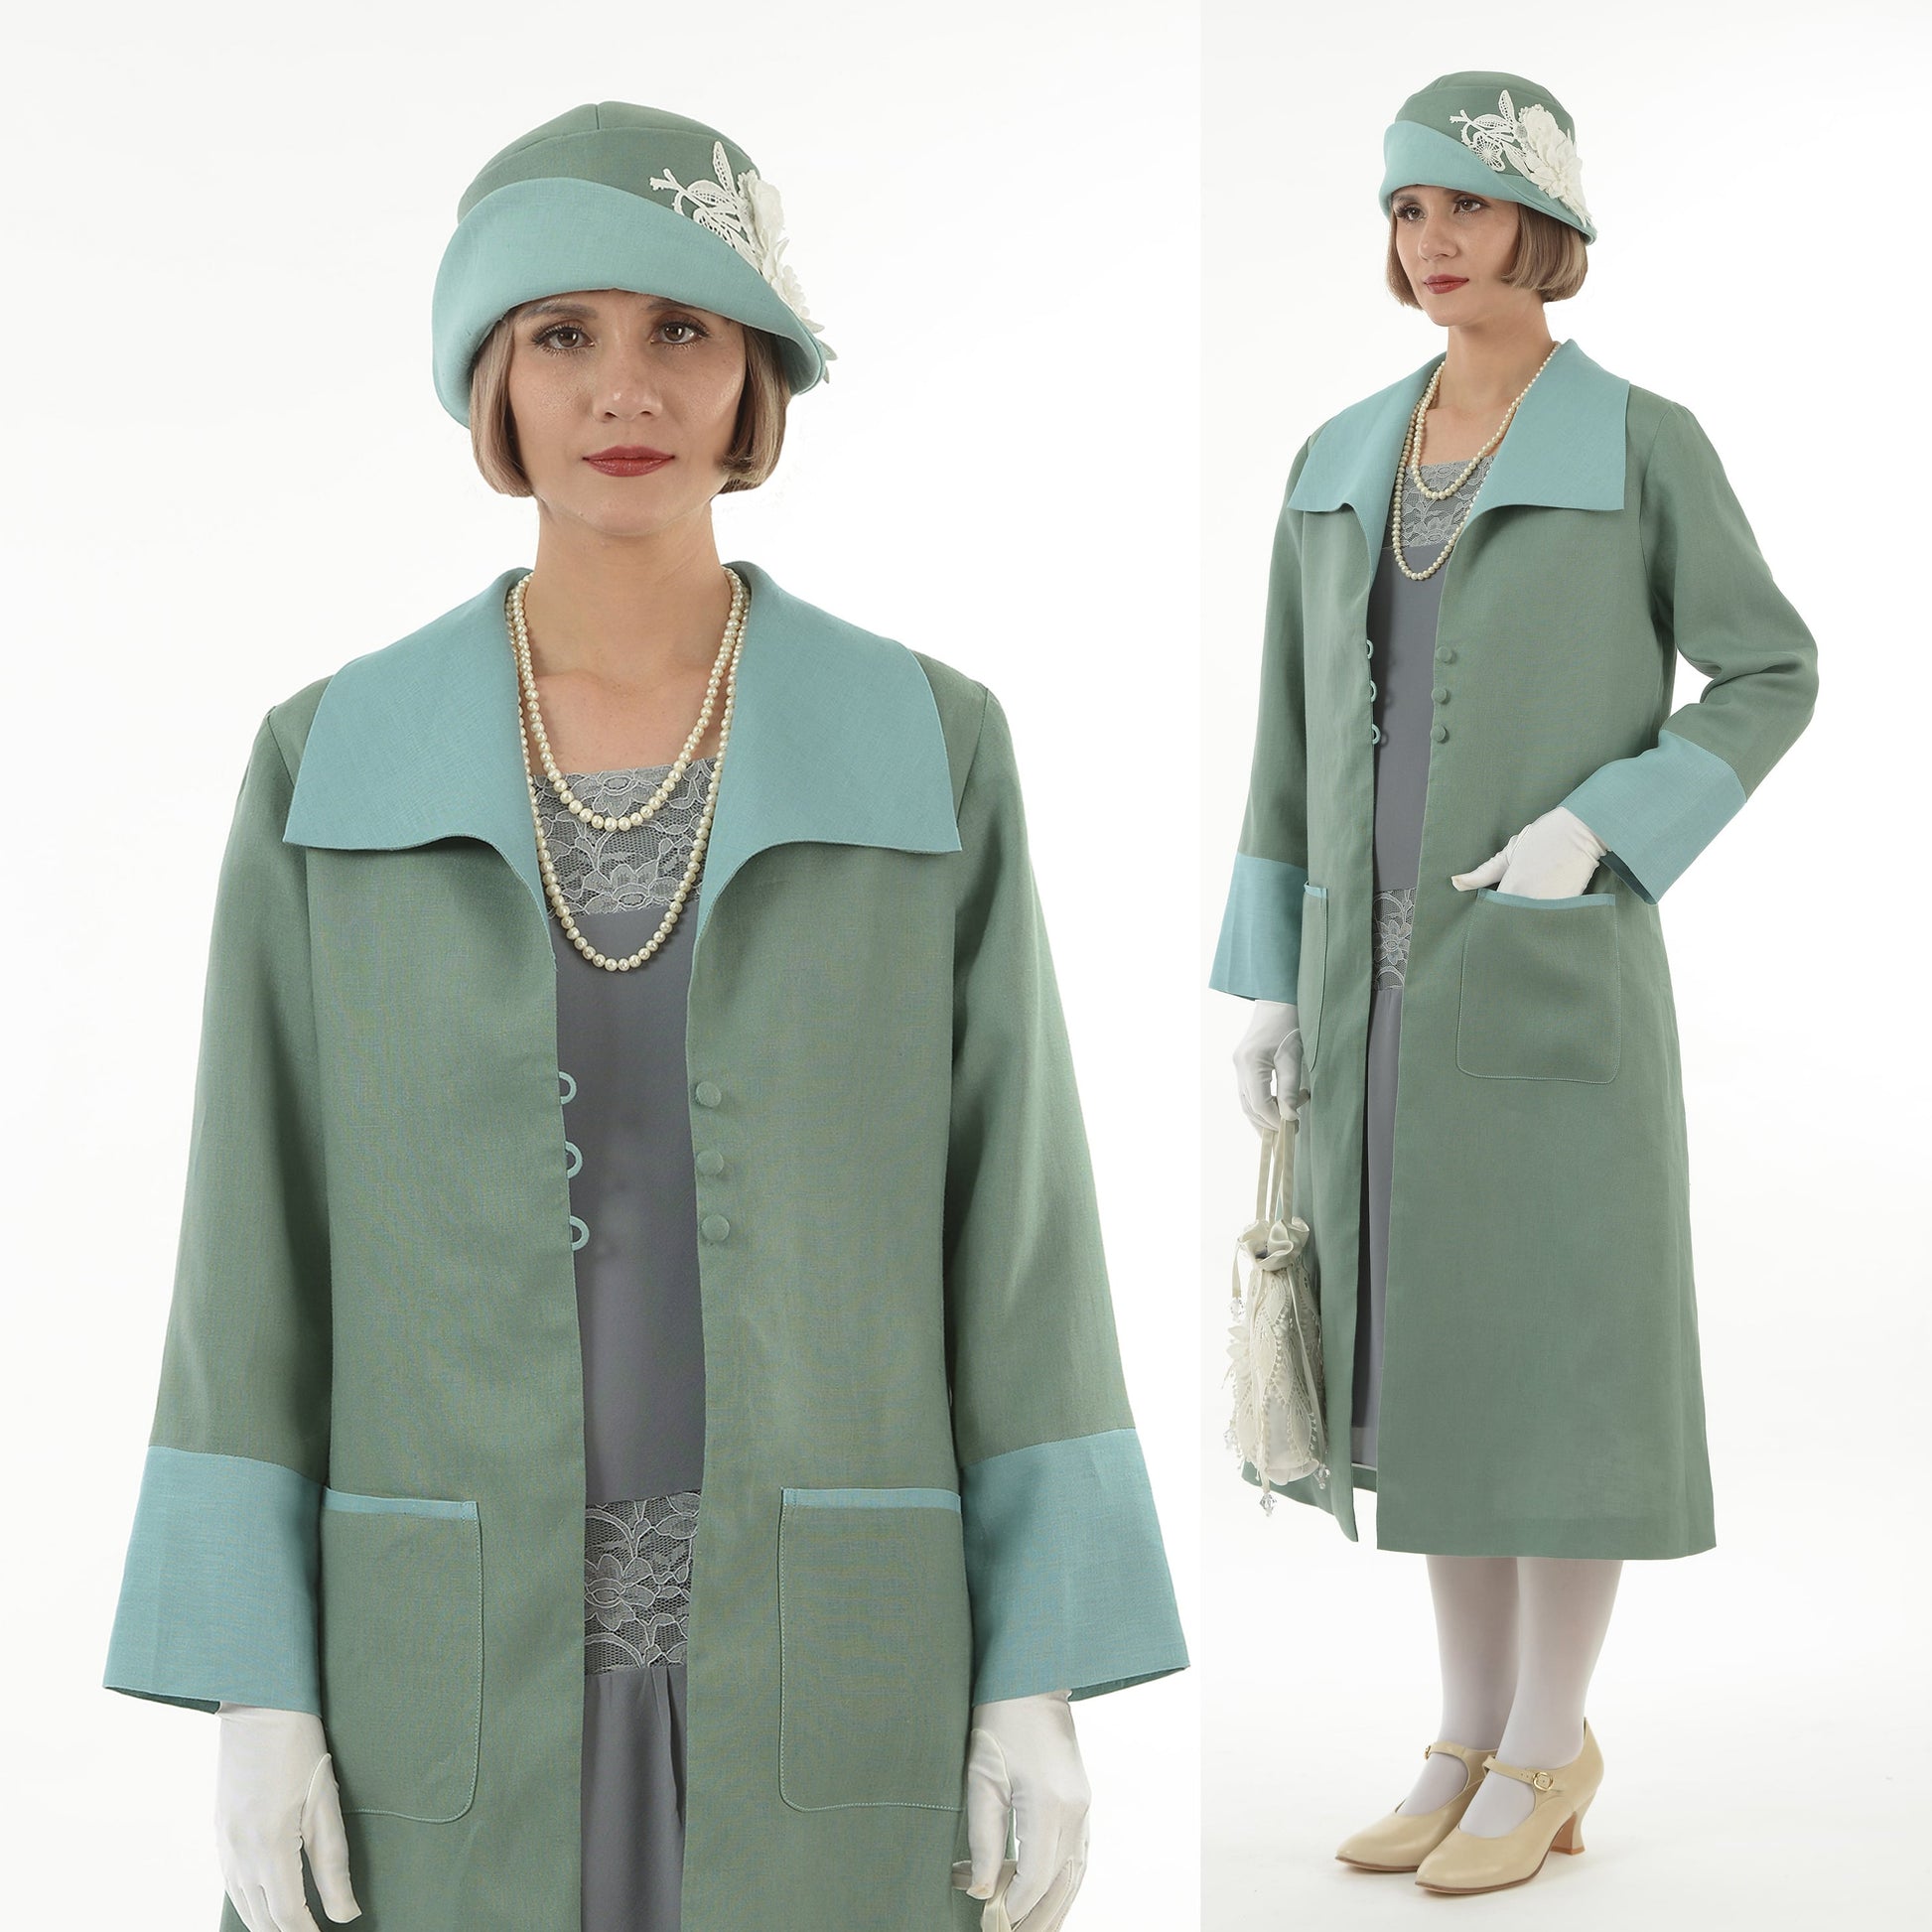 Flapper day coat in muted green linen and pastel blue details - a roaring twenties coat